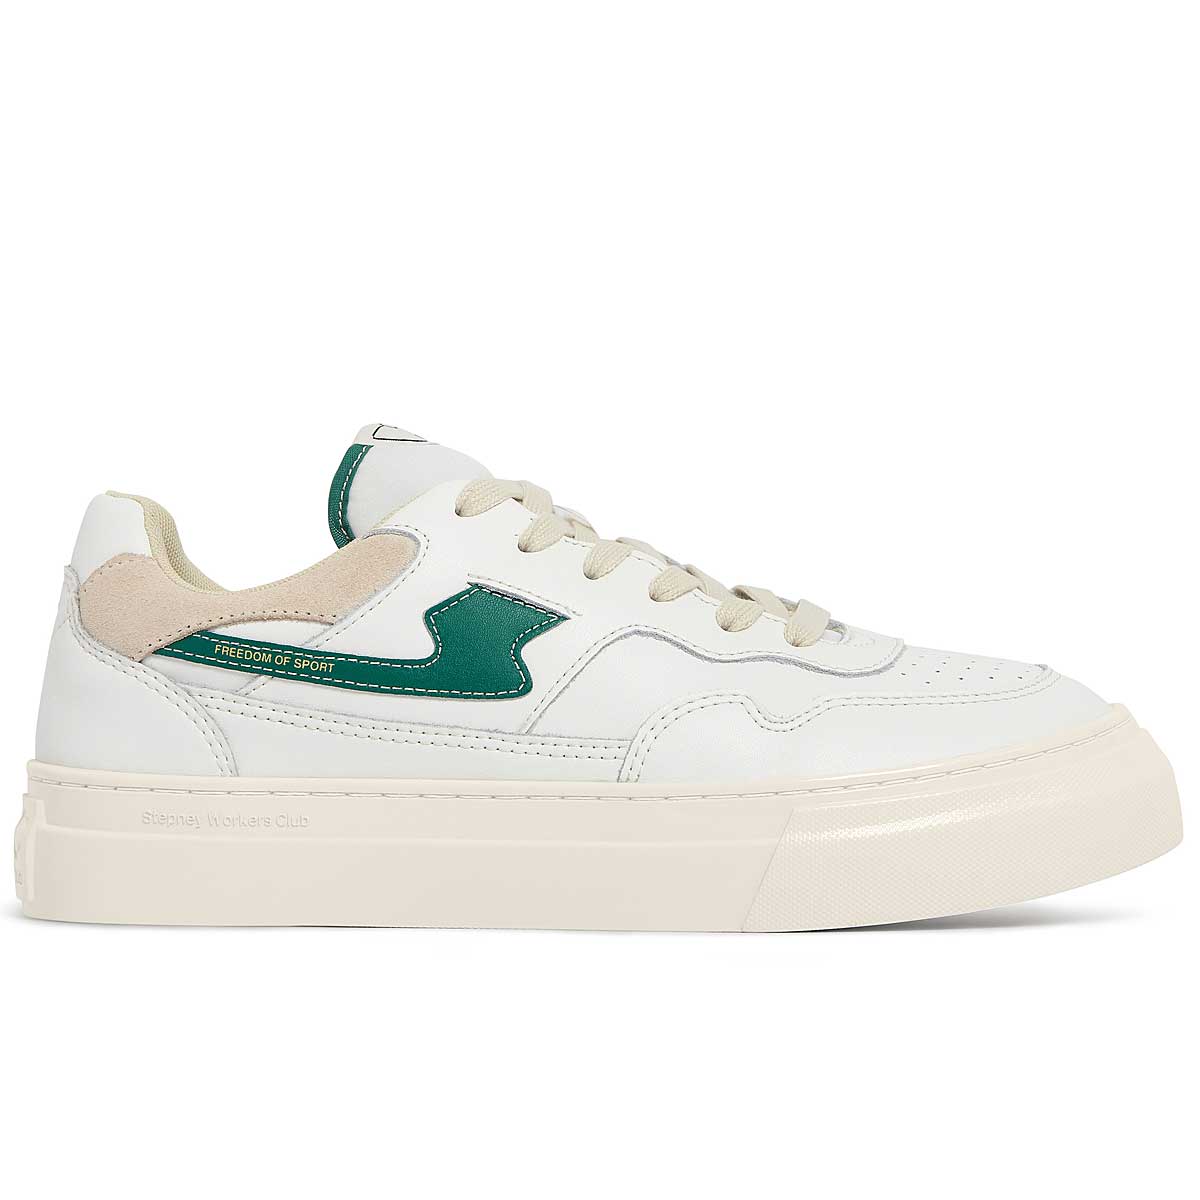 Stepney Workers Club Pearl S-Strike Leather, White/Green